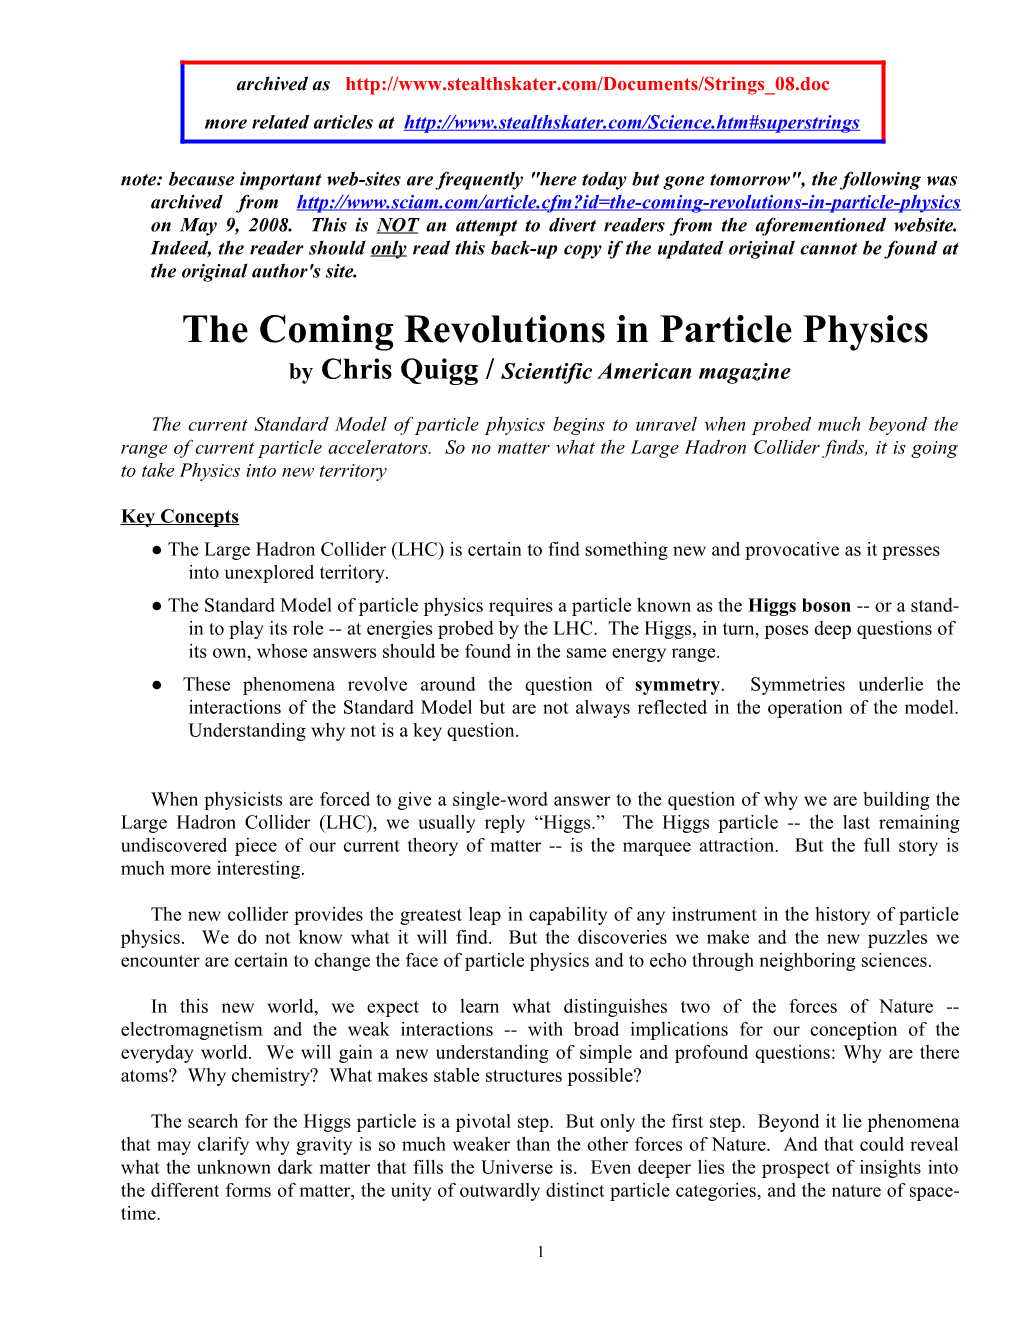 The Coming Revolutions in Particle Physics